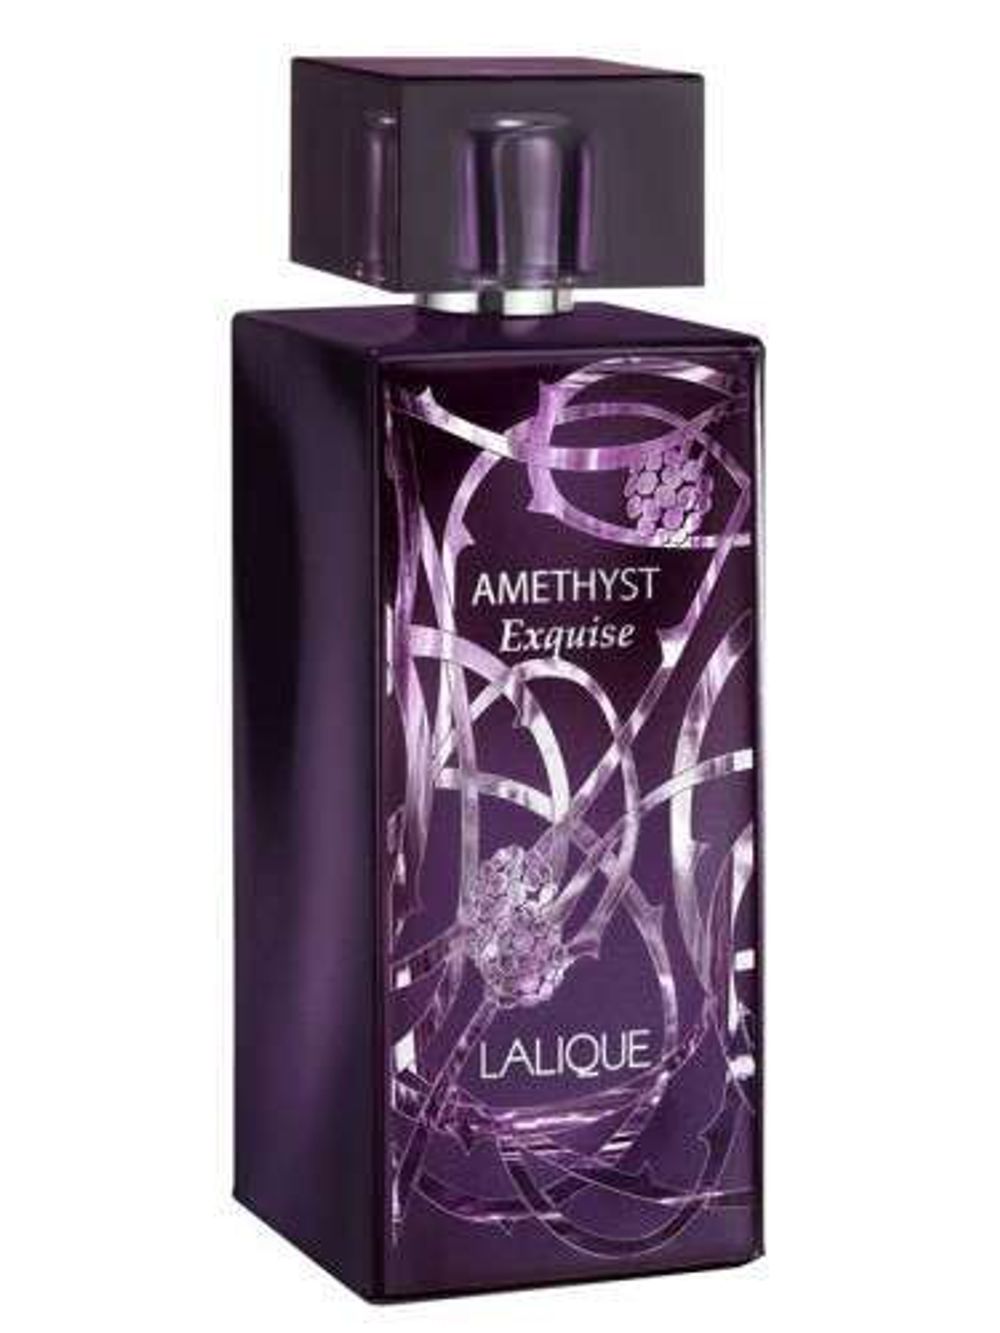 Вода аметист. Духи Amethyst exquise. Lalique Amethyst exquise парфюмерная вода 100 мл. Lalique Amethyst exquise 100ml EDP. Lalique Amethyst жен парфюмерная вода тестер 100мл.